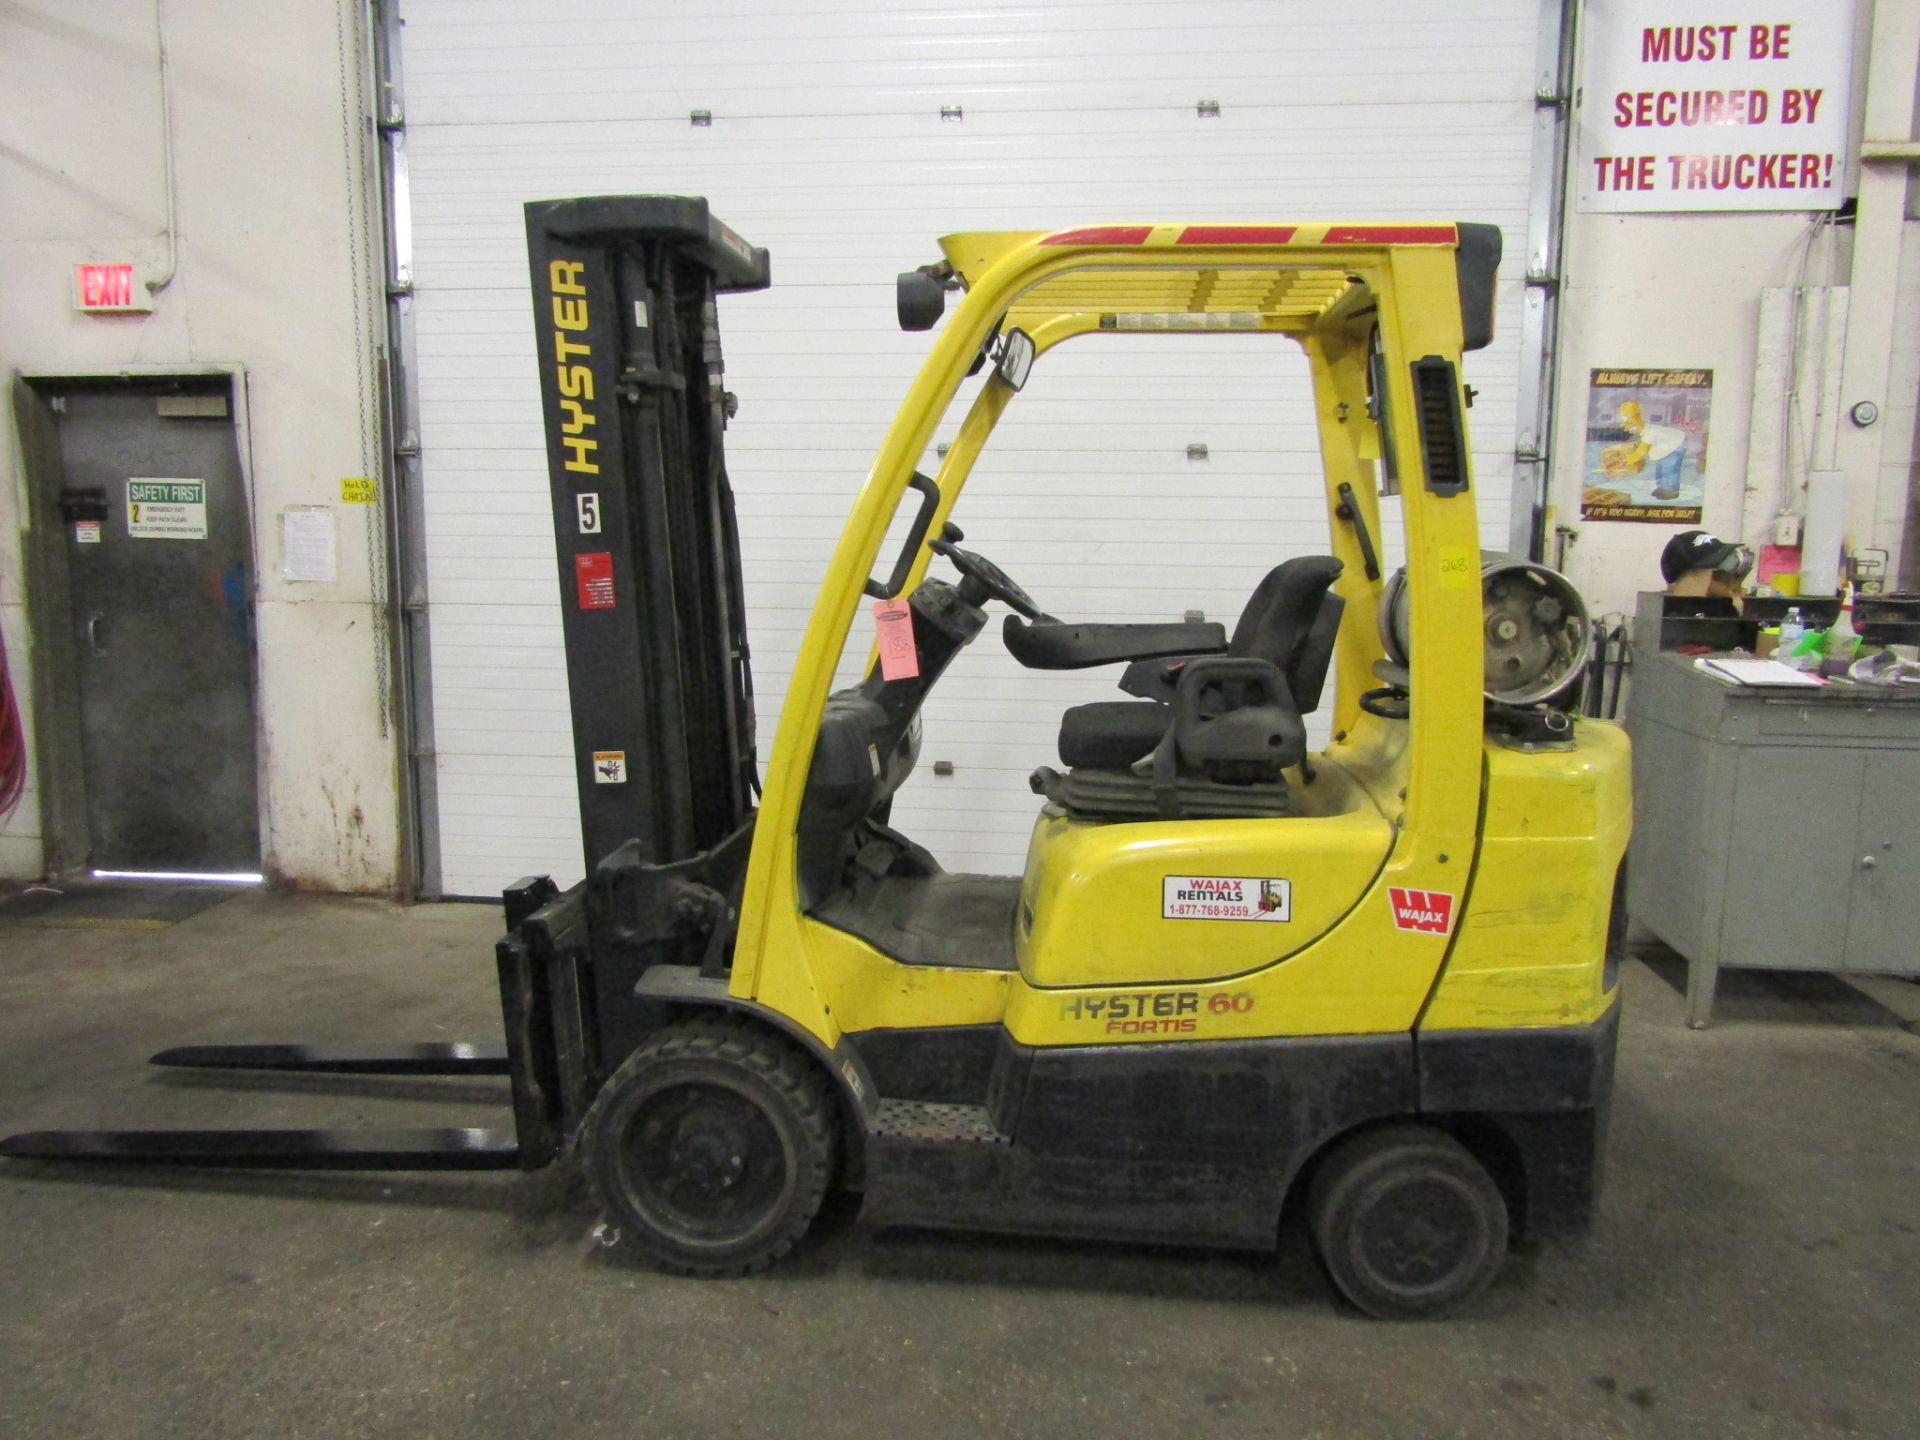 2011 Hyster 6000lbs Capacity Forklift with 3-stage mast - LPG (propane) with sideshift (no propane